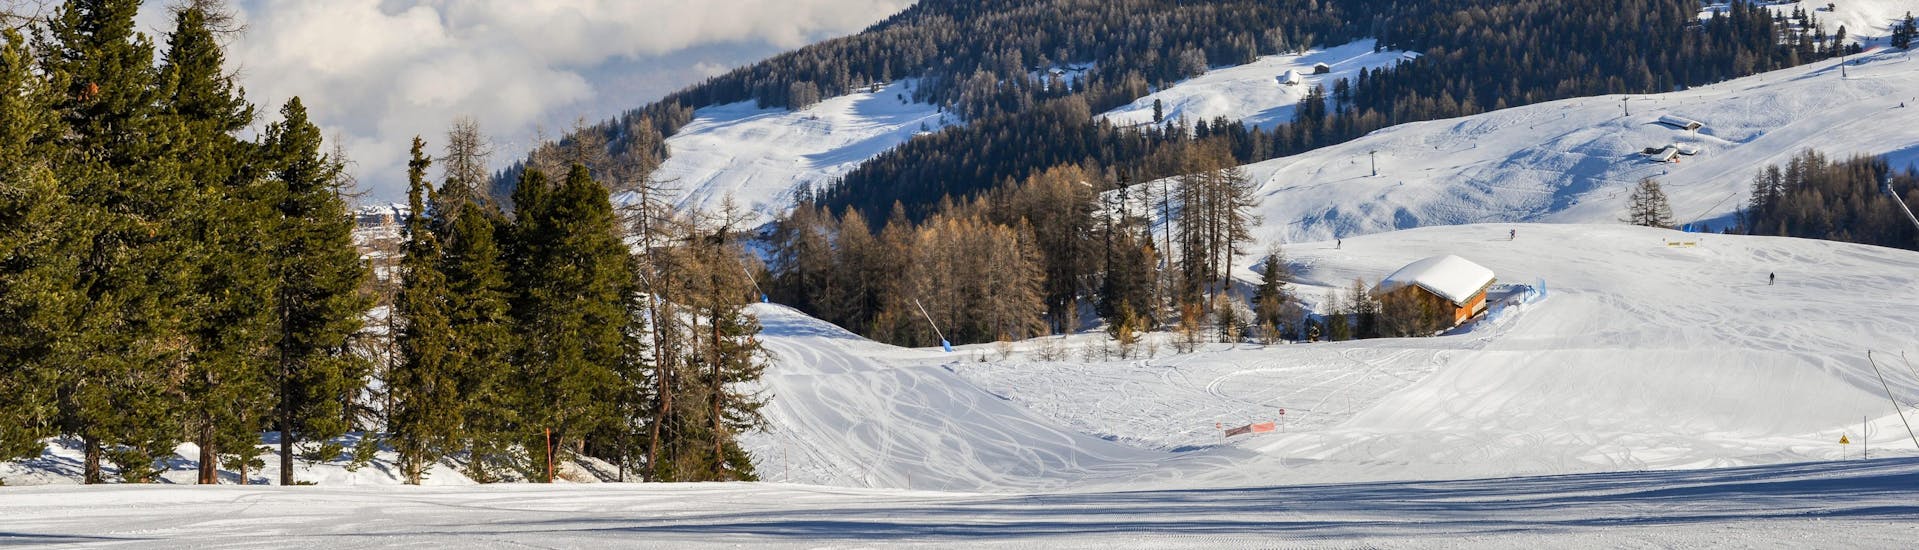 Part of the slopes in Pila, Val d'Aosta in Italy, where you can book ski lessons.